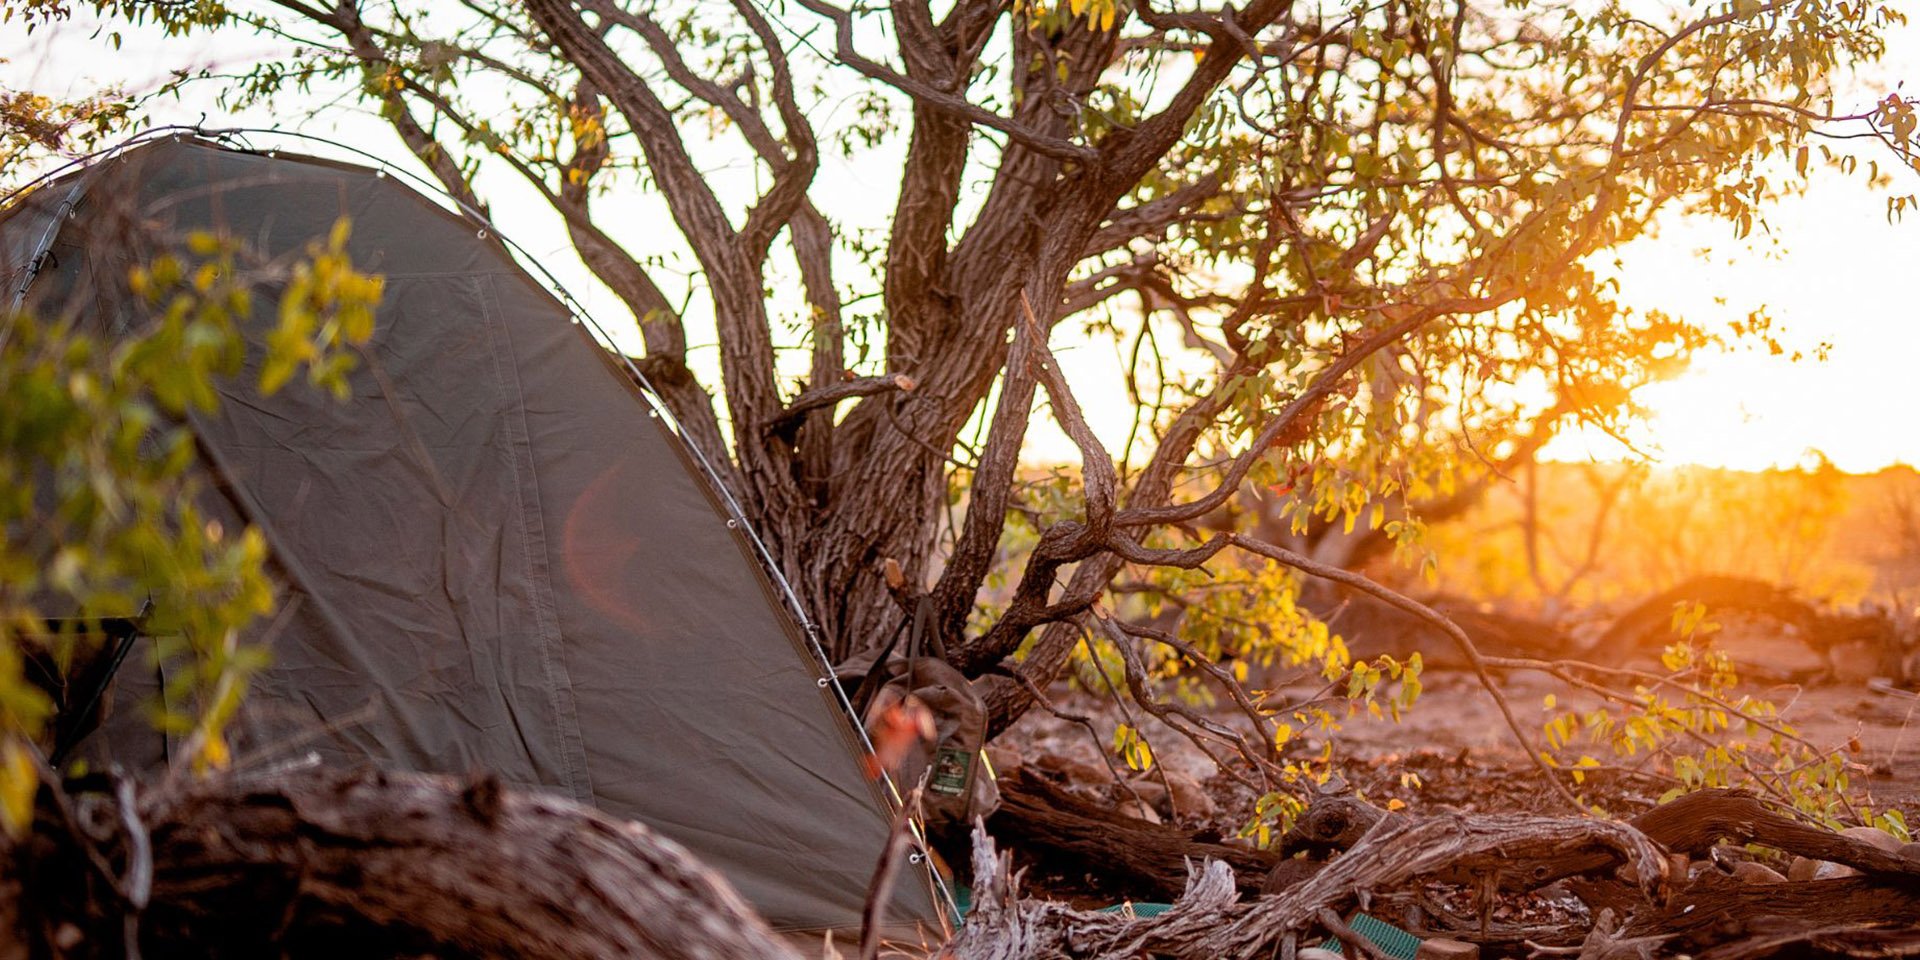 Tent under a tree, sunset, Namibia